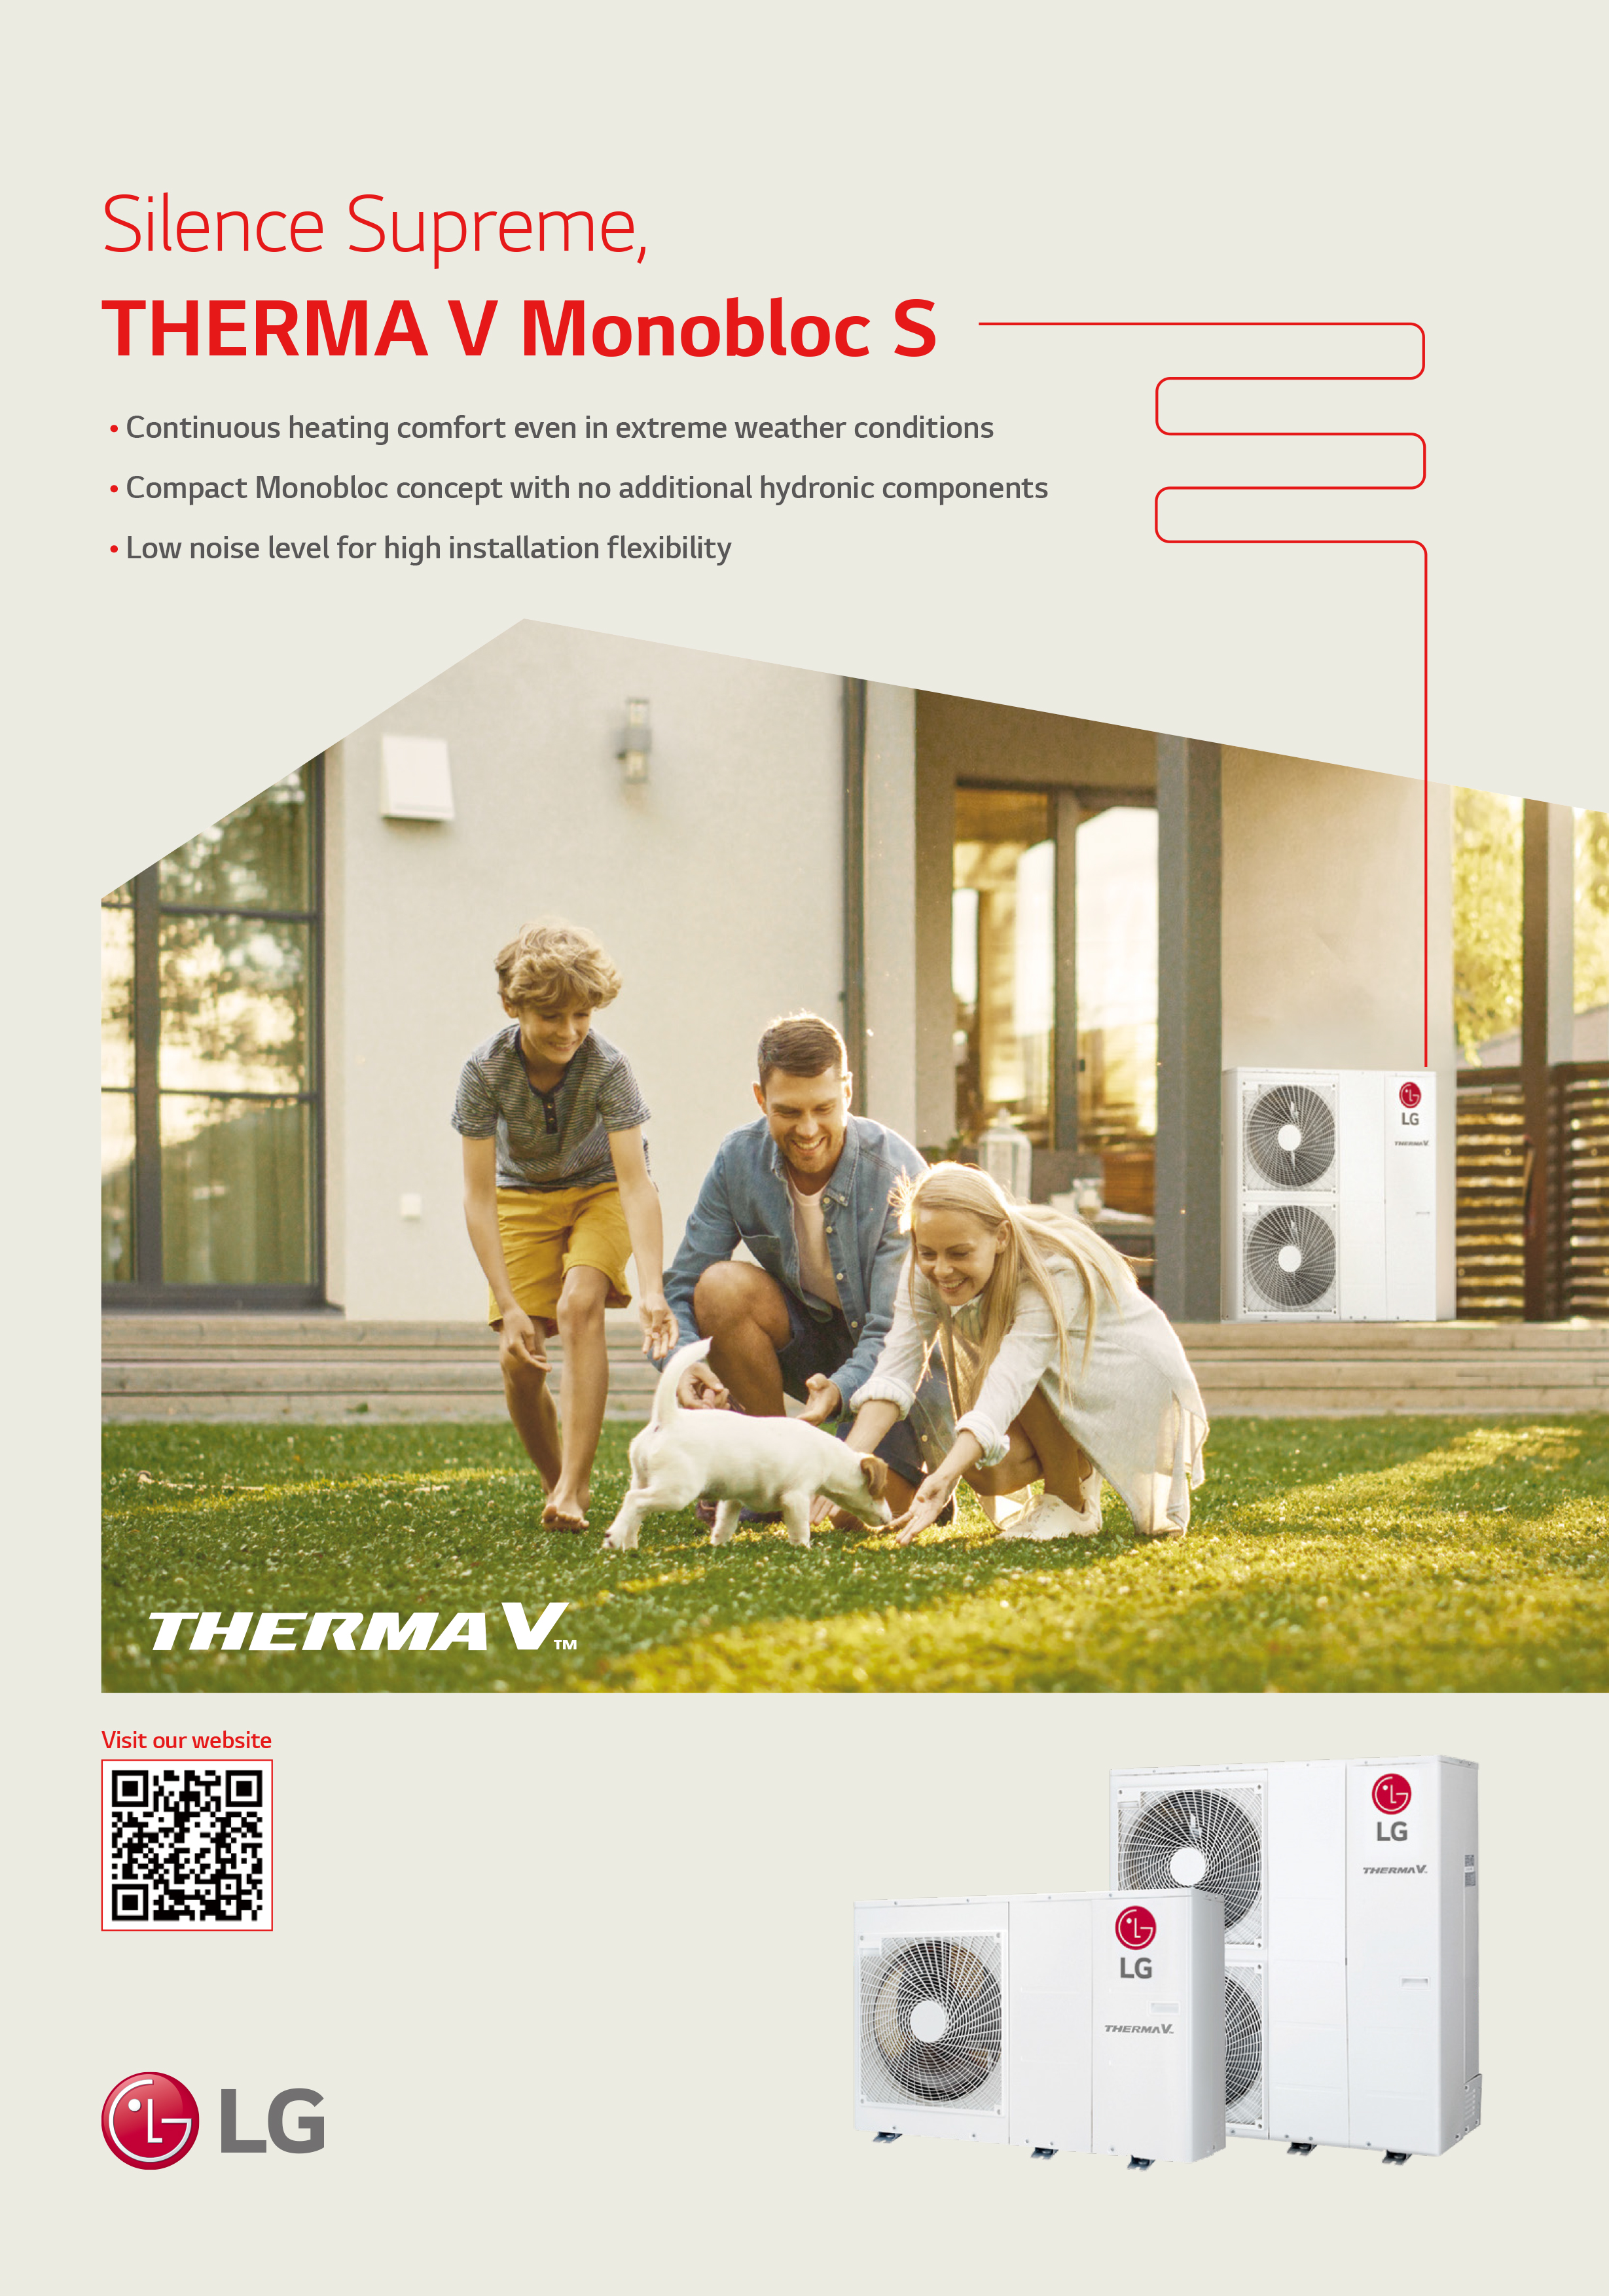 THERMA V (AWHP) R32 Monobloc S leaflet_(for End-user)_0718_low